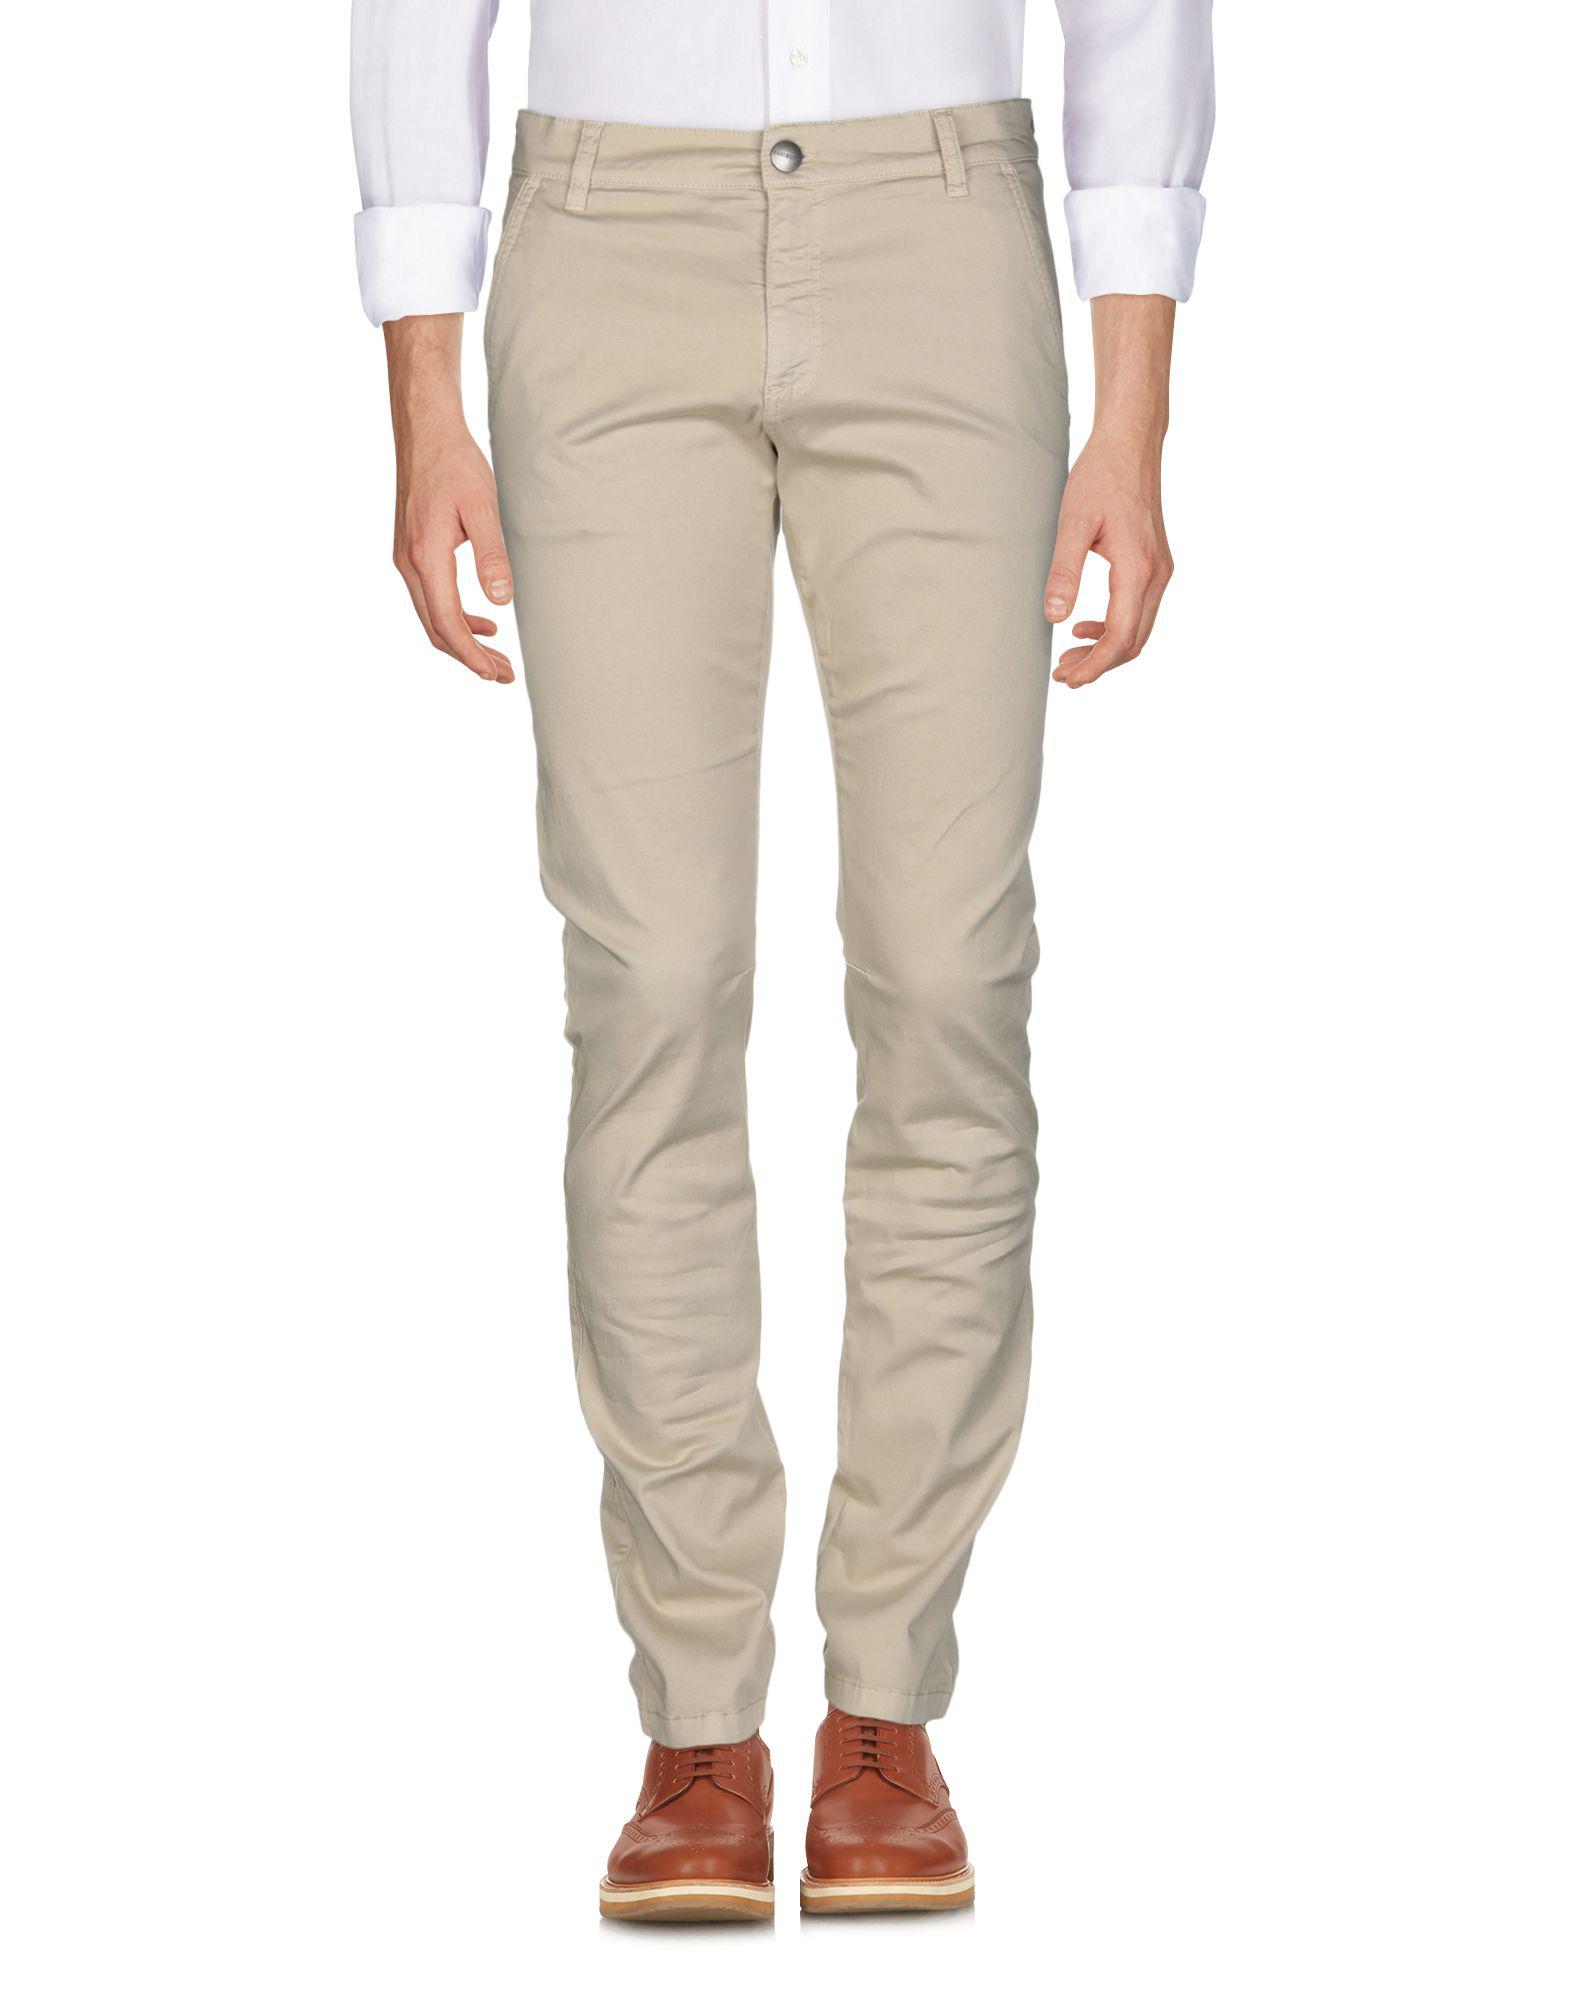 Bikkembergs Cotton Casual Pants in Beige (Natural) for Men - Lyst